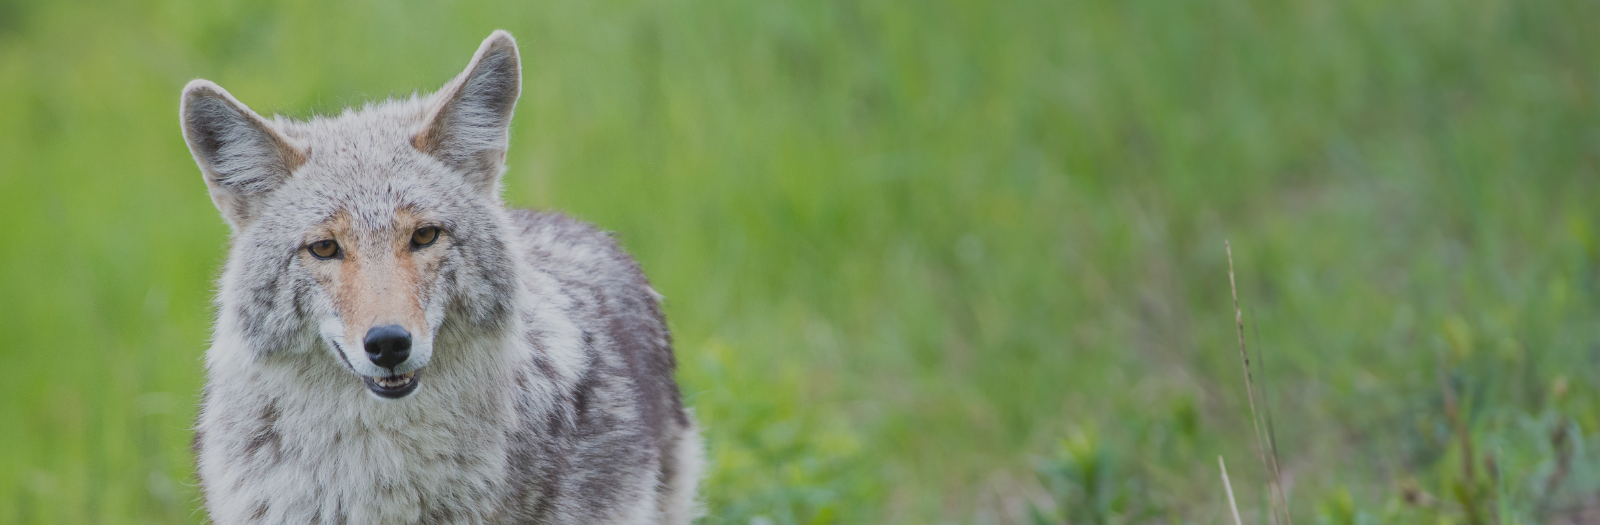 Coyote looking at a camera while standing in a grassy field